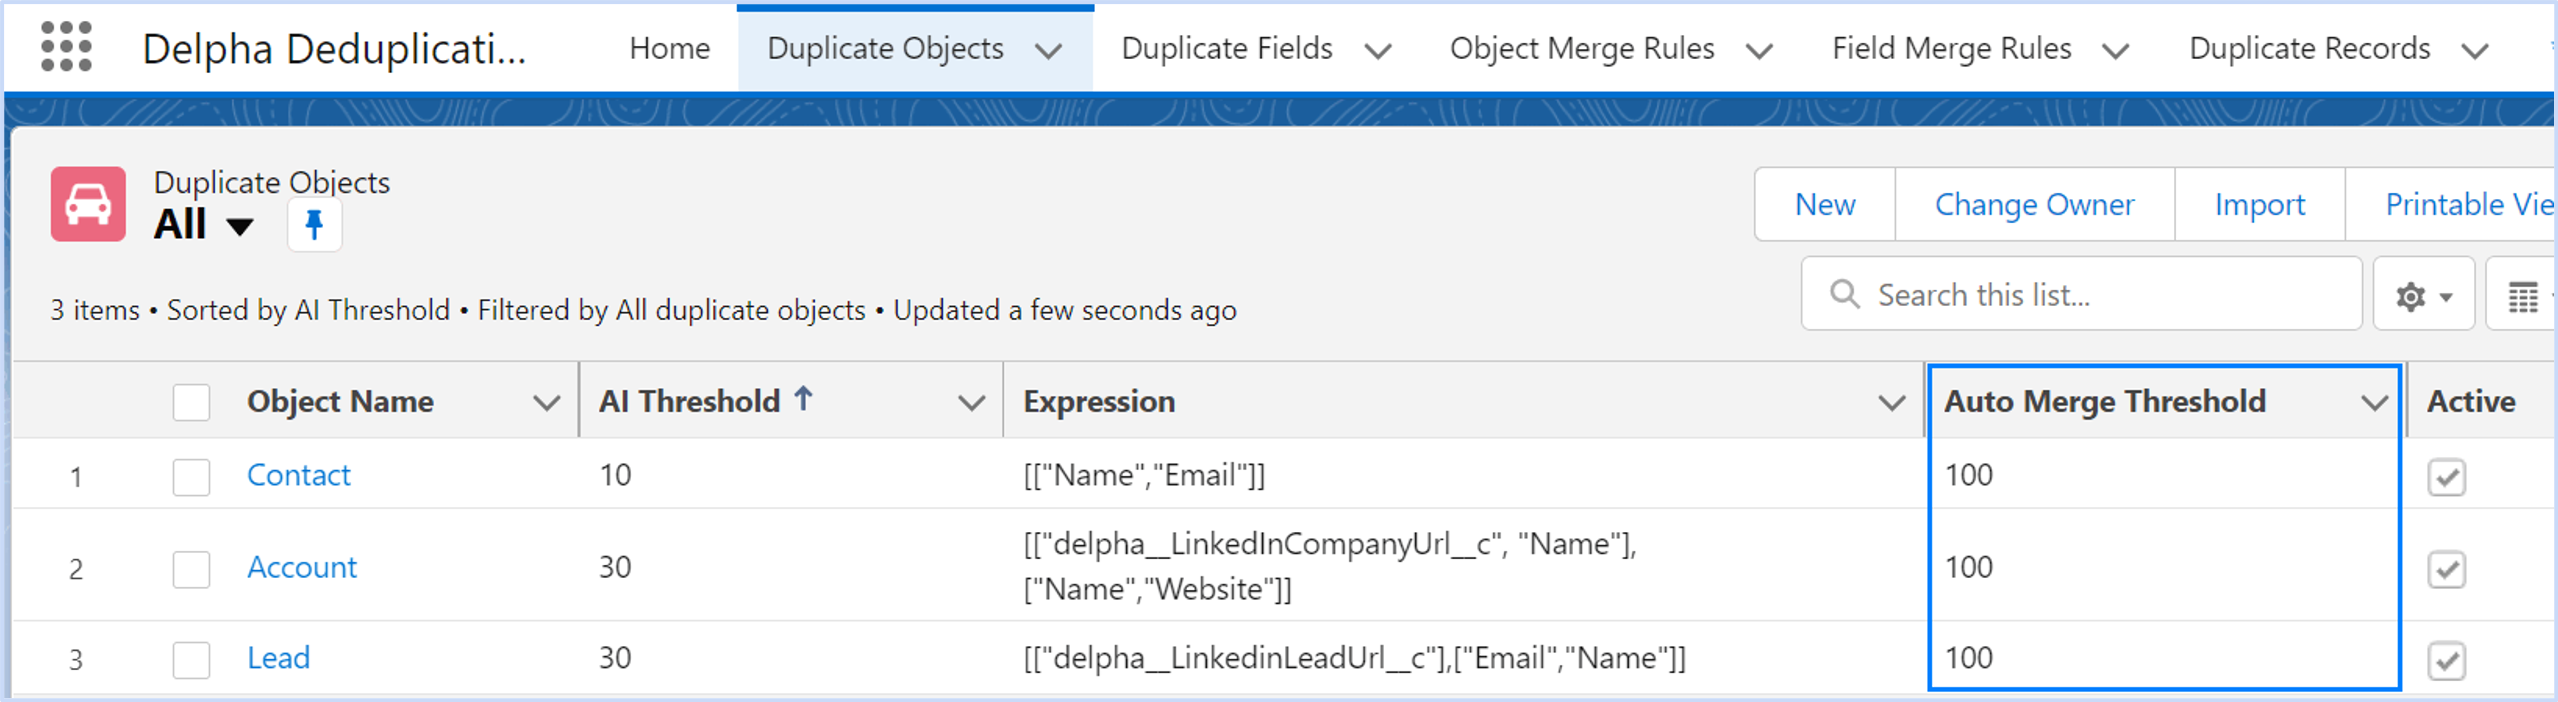 Screenshot of where Salesforce Admins can set the AI threshold to automate duplicate merges for each Object.